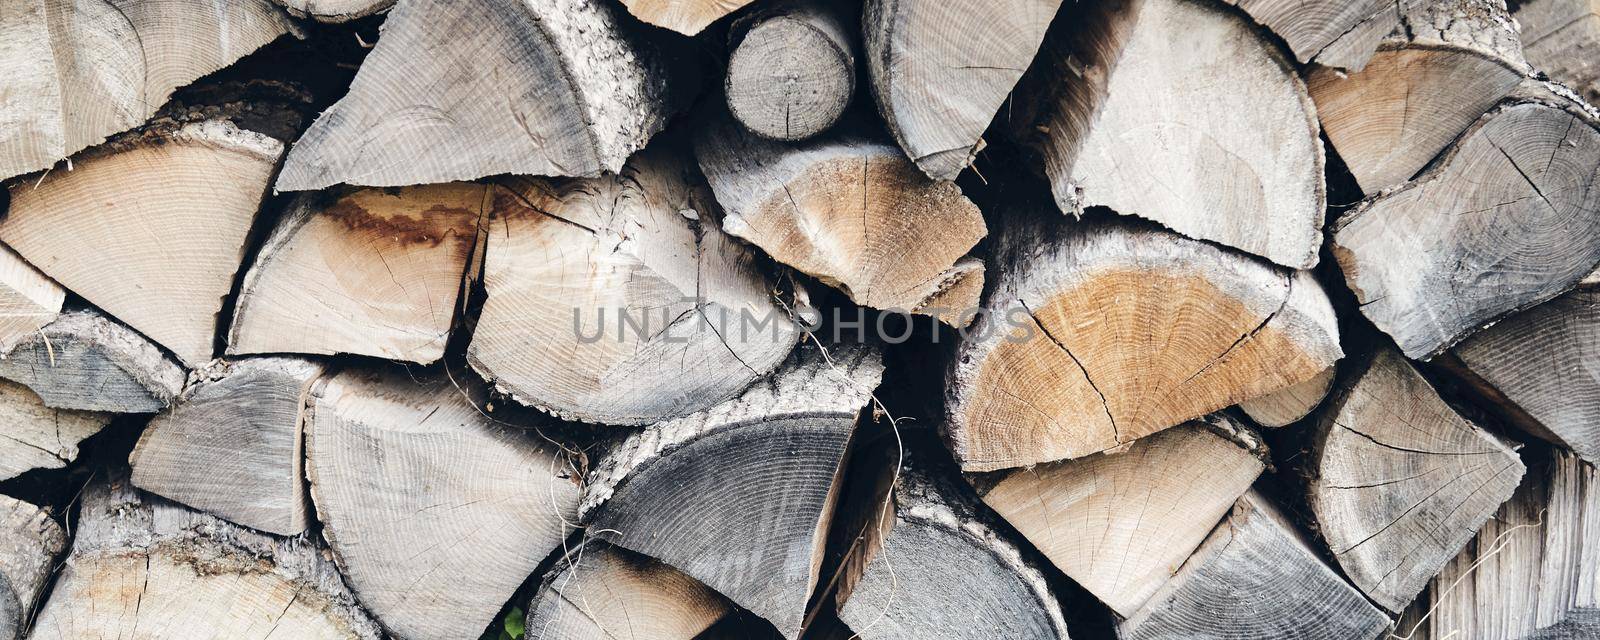 Logs in a sawmill yard. Stacks of woodpile firewood texture background by OneWellStyudio